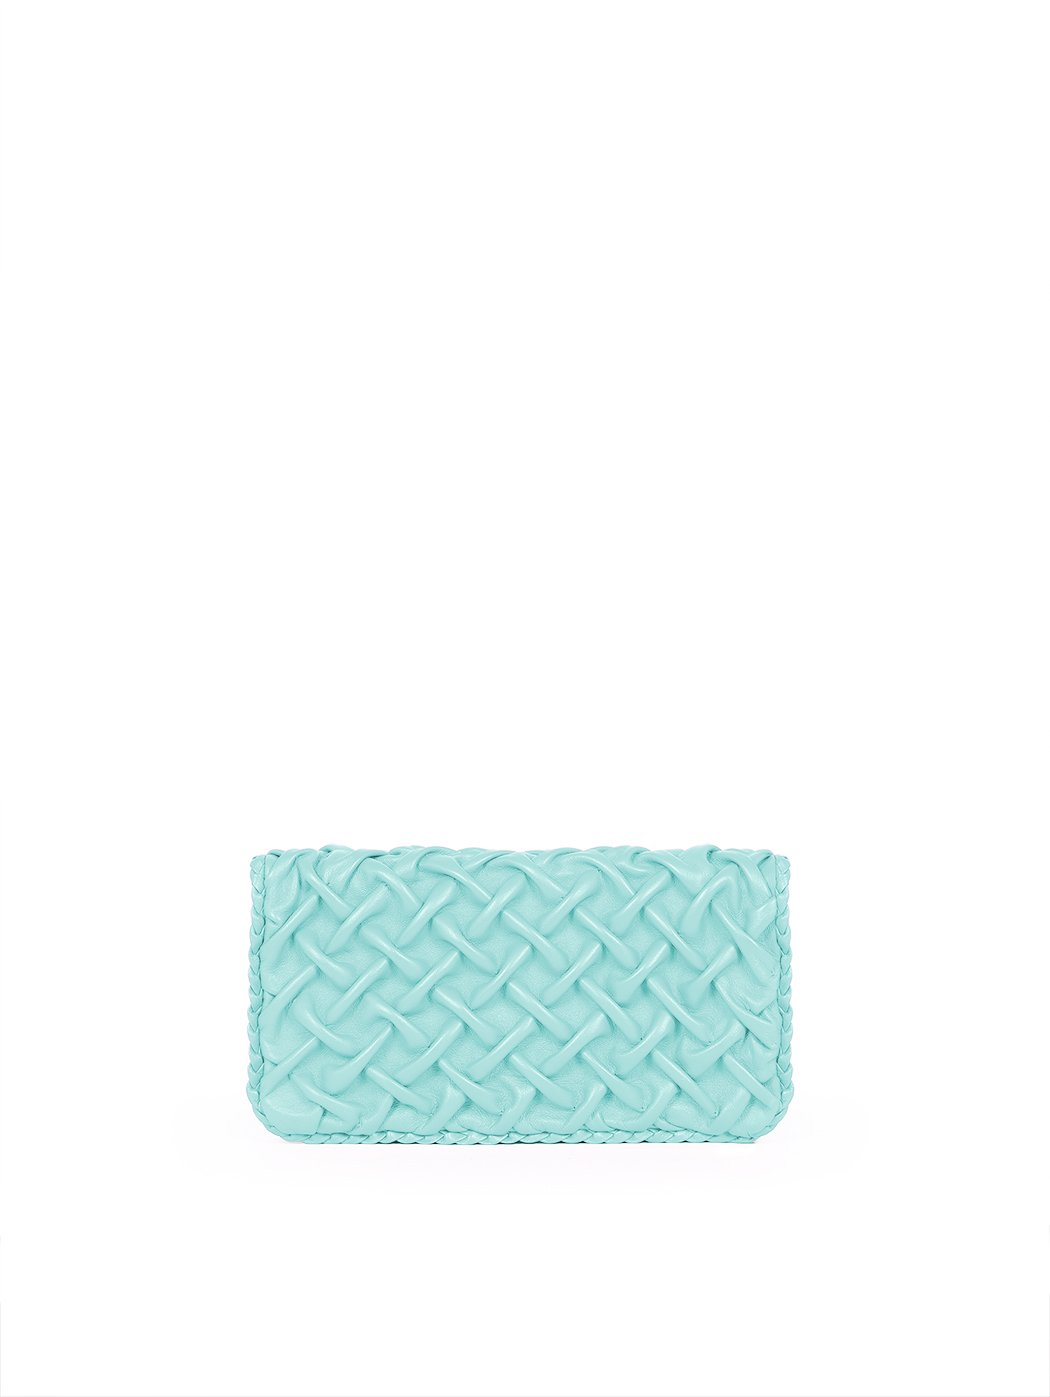 Foldover Crossbody Quilted Weave Clutch Leather Aqua Blue